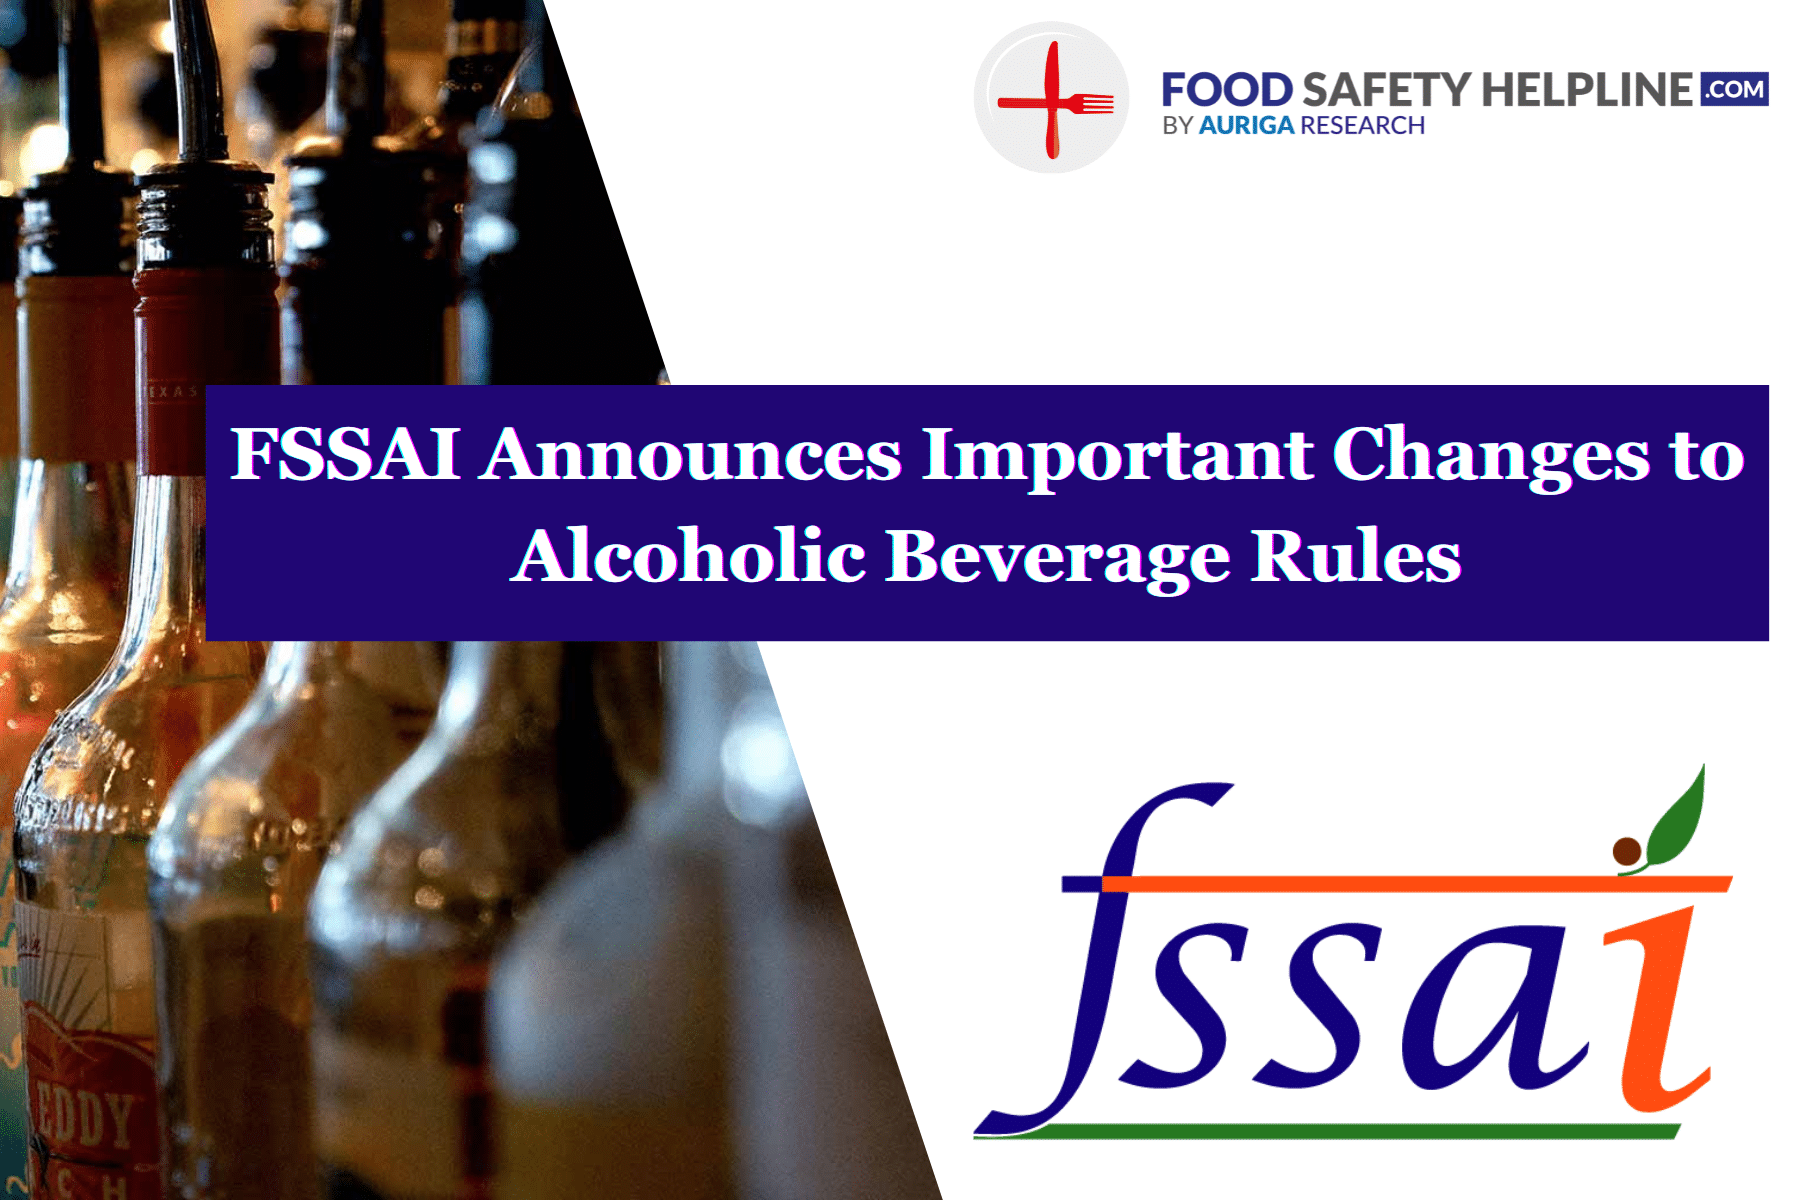 Fssai Central License For Food Business at Rs 7500/year in Ahmedabad